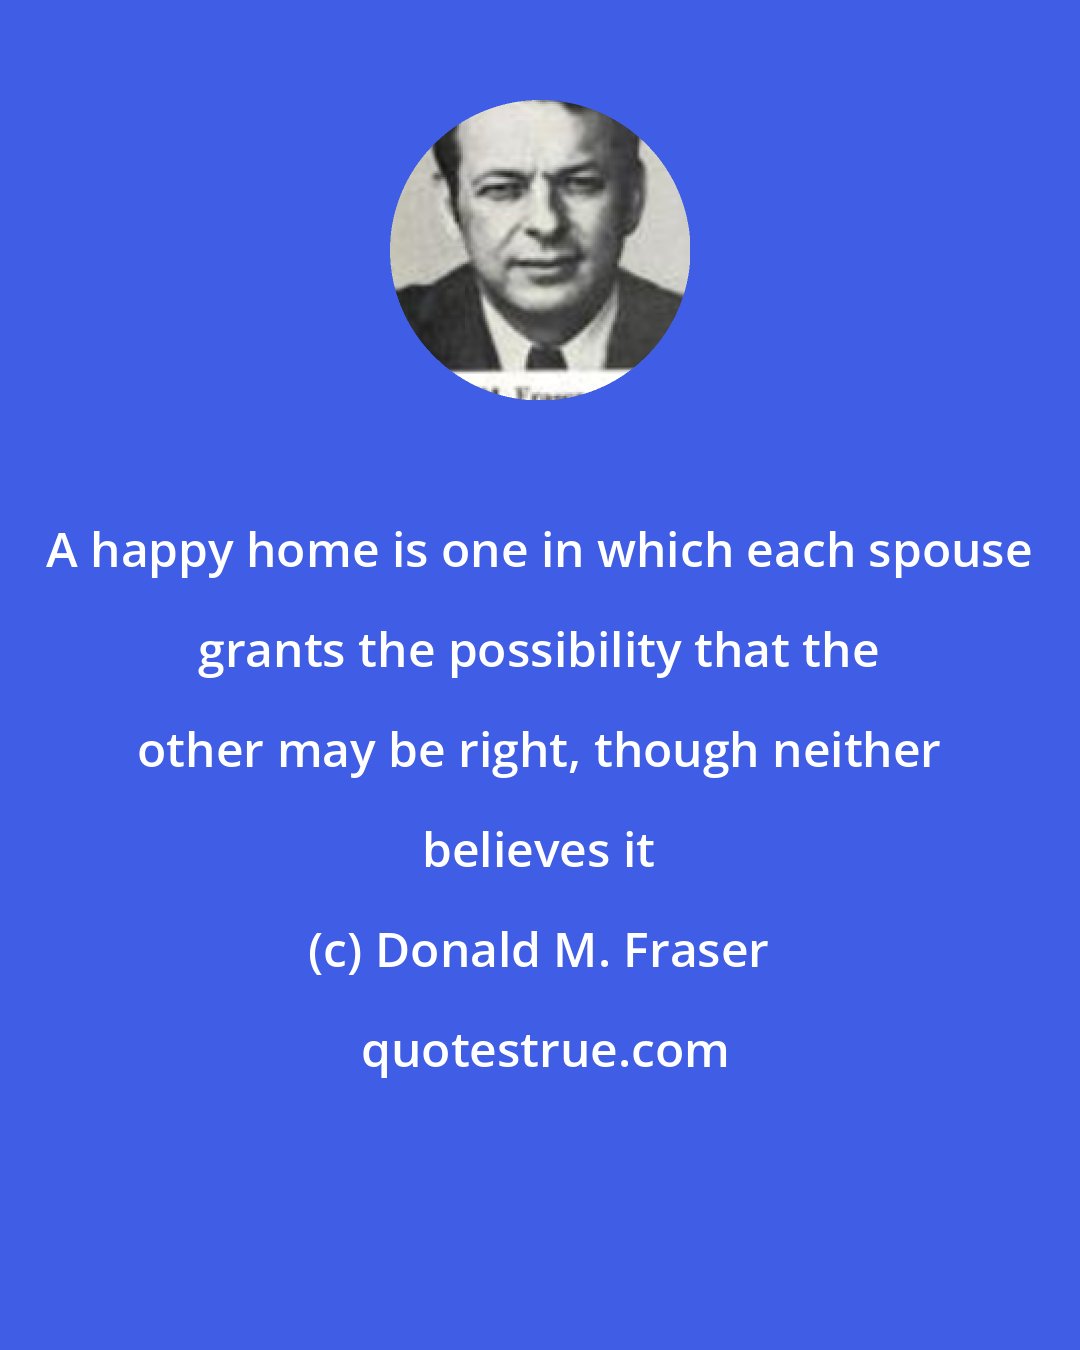 Donald M. Fraser: A happy home is one in which each spouse grants the possibility that the other may be right, though neither believes it